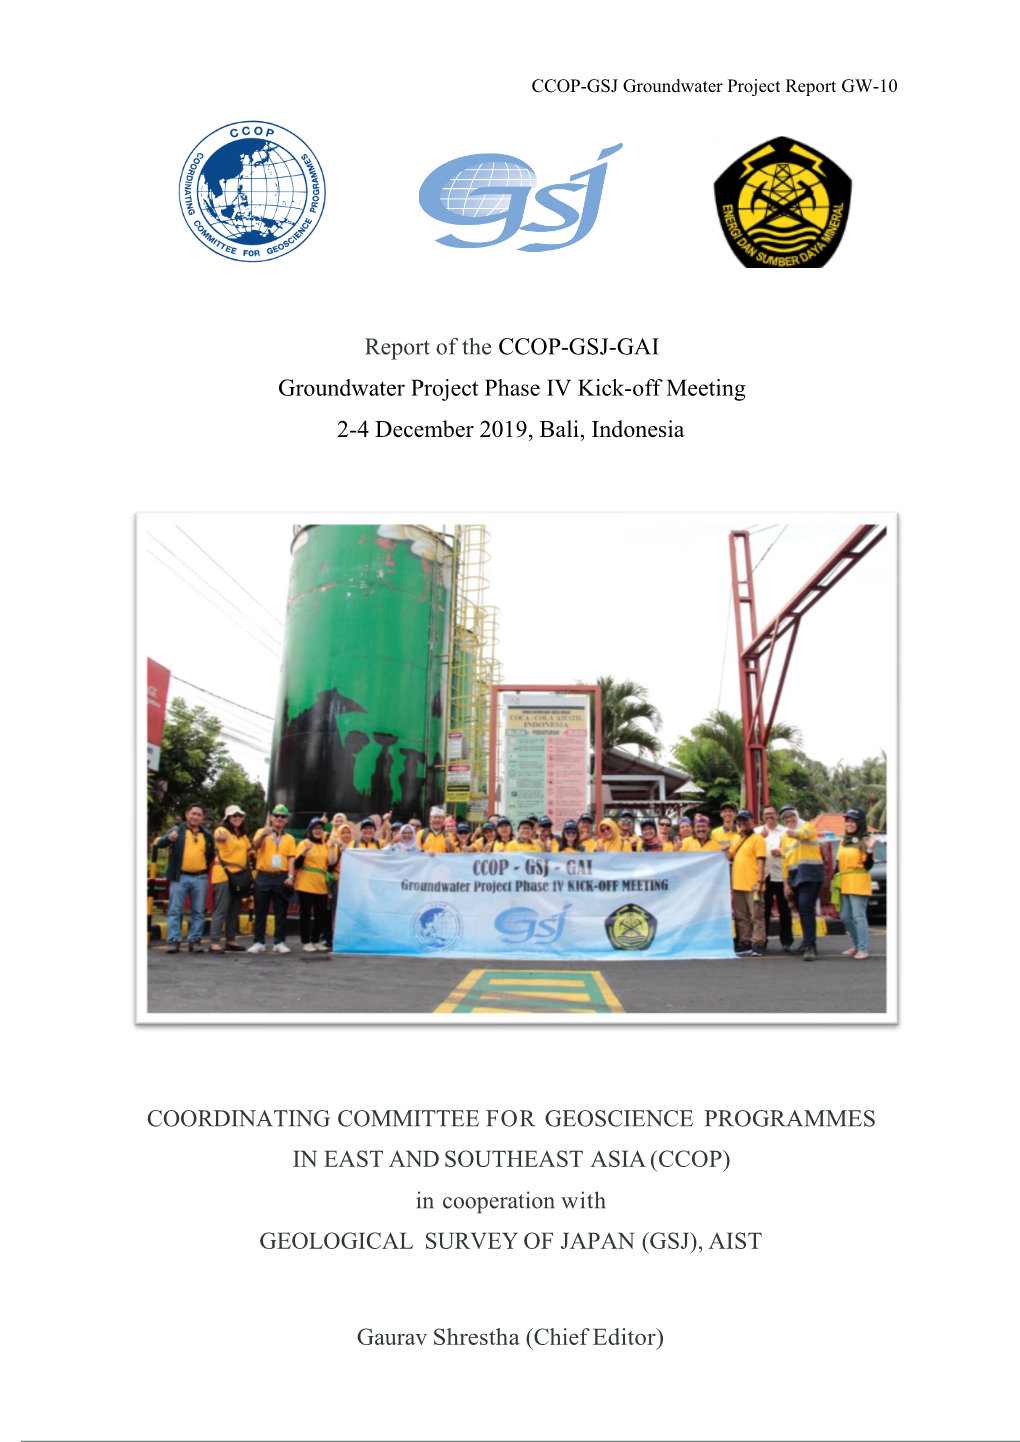 Report of the CCOP-GSJ-GAI Groundwater Project Phase IV Kick-Off Meeting 2-4 December 2019, Bali, Indonesia COORDINATING COMMITT